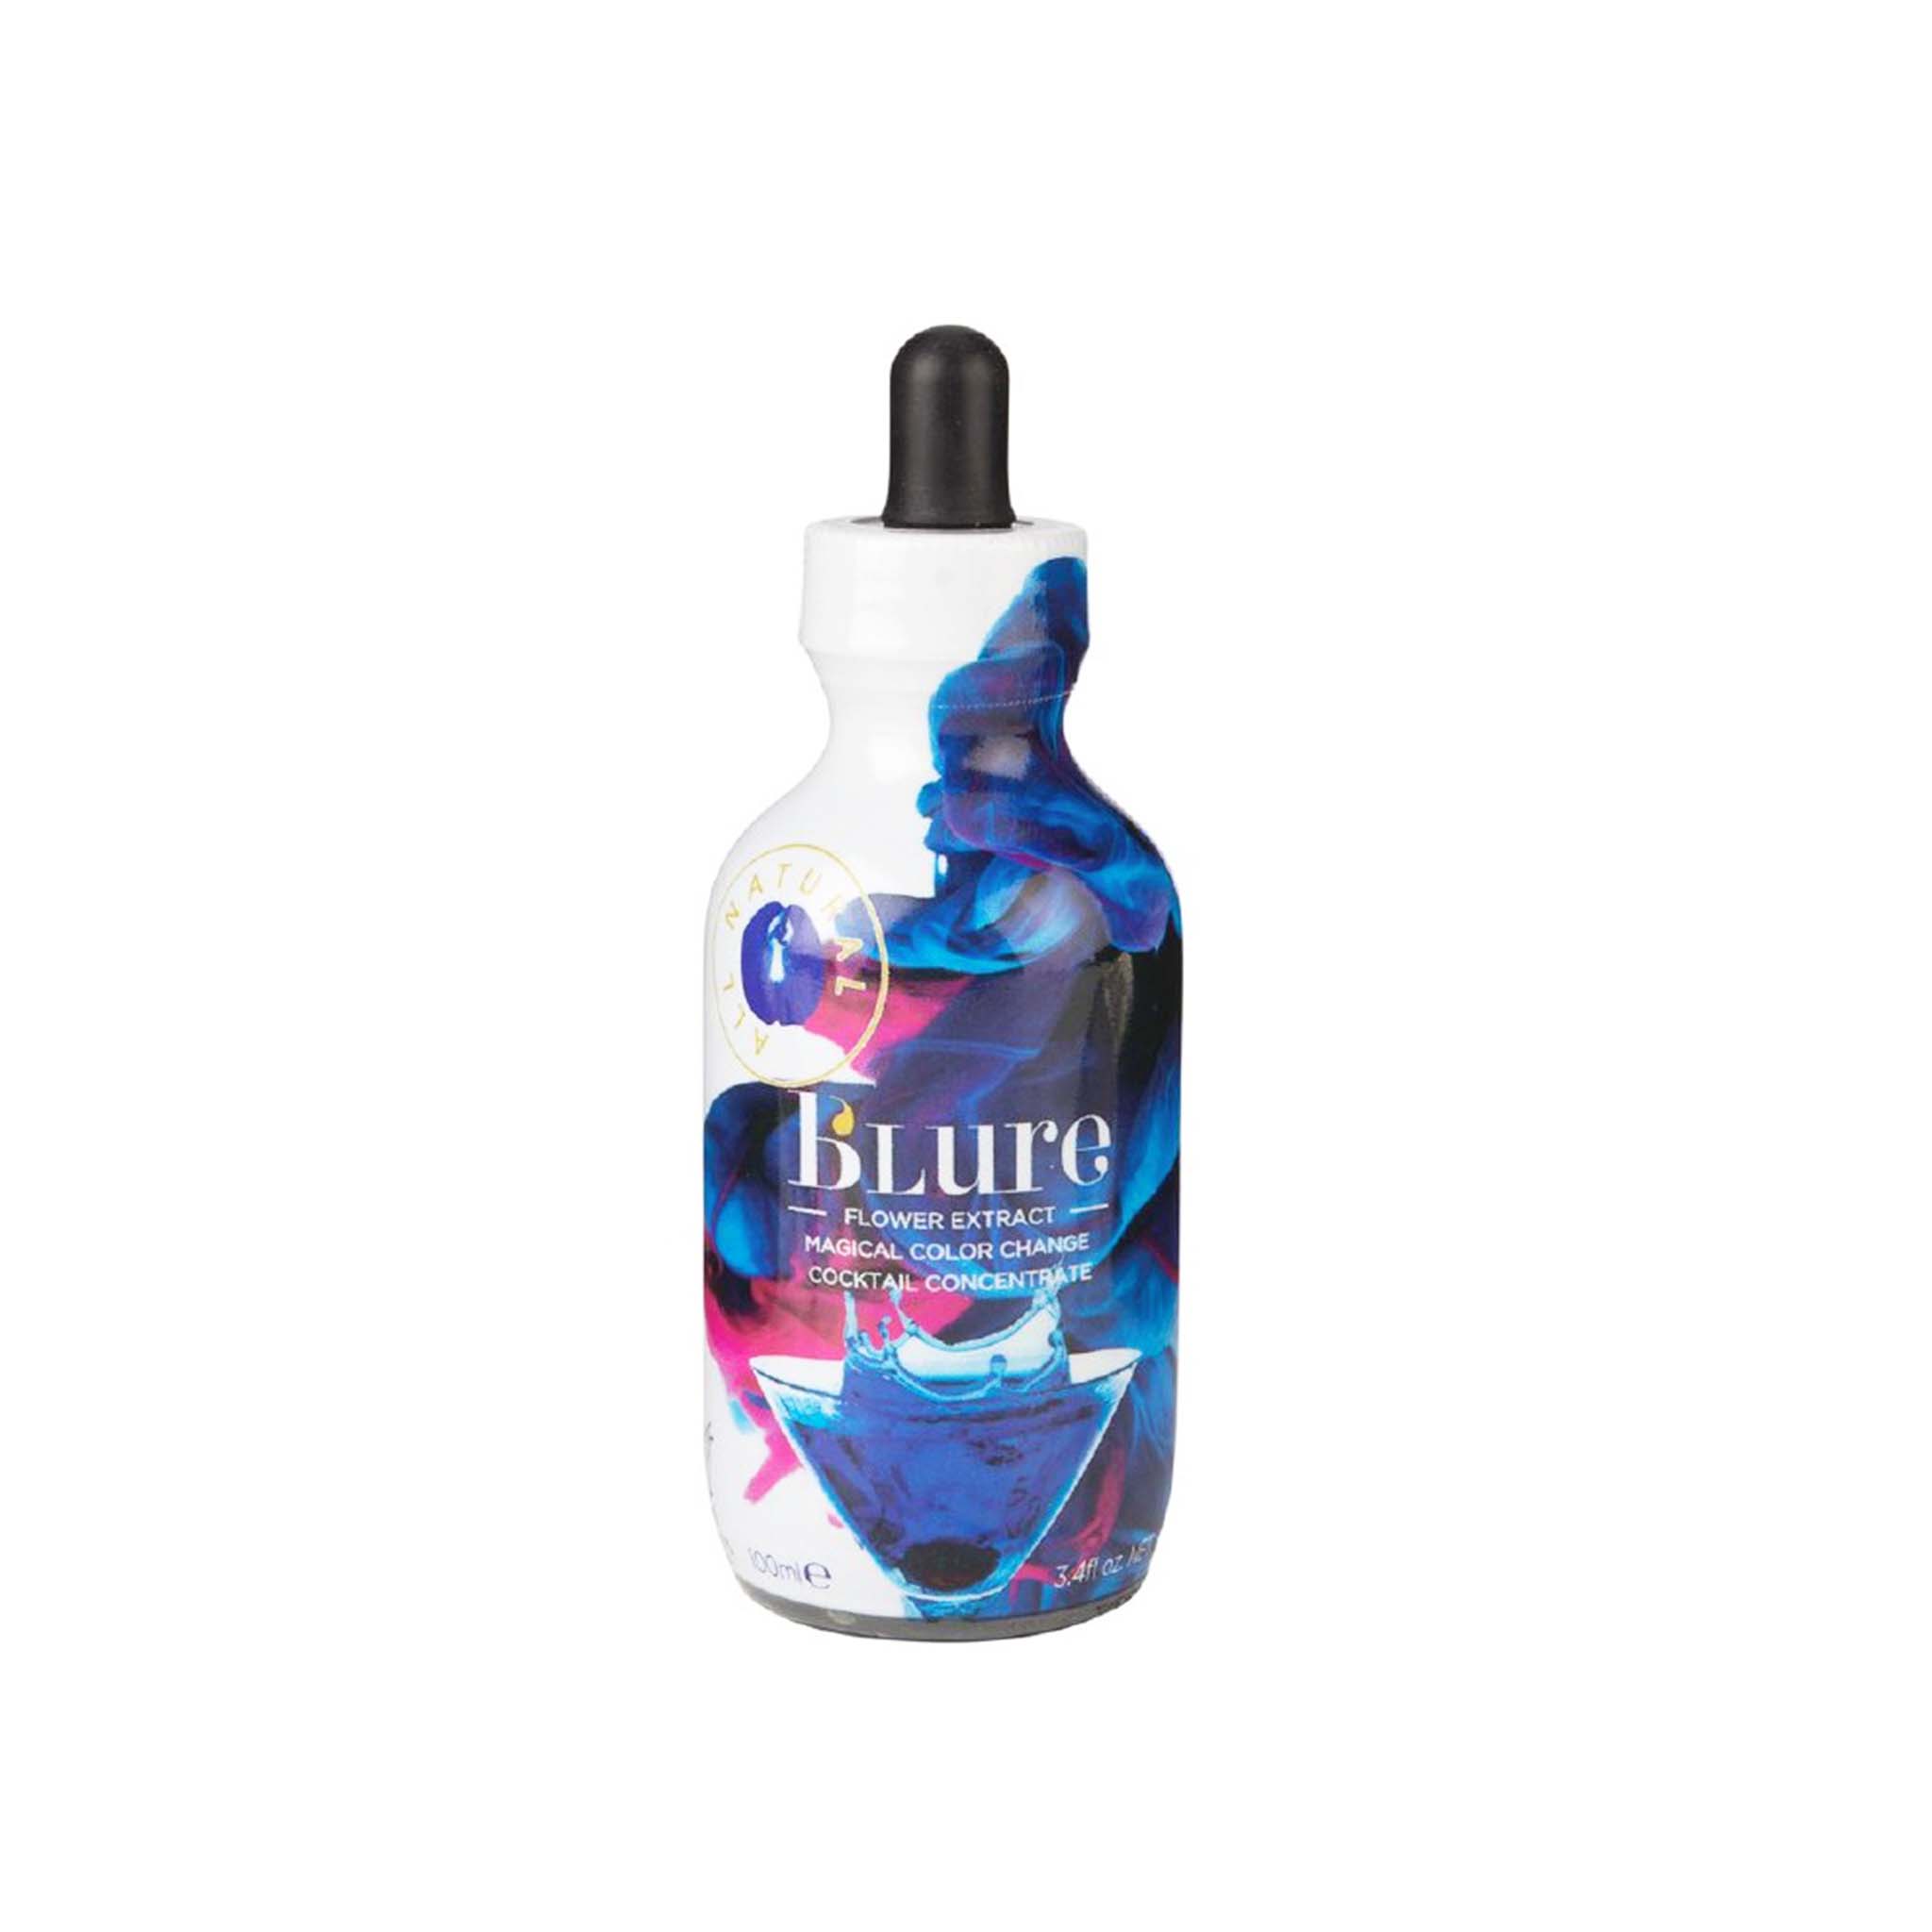 B'LURE BUTTERFLY PEA FLOWER EXTRACT 100ml